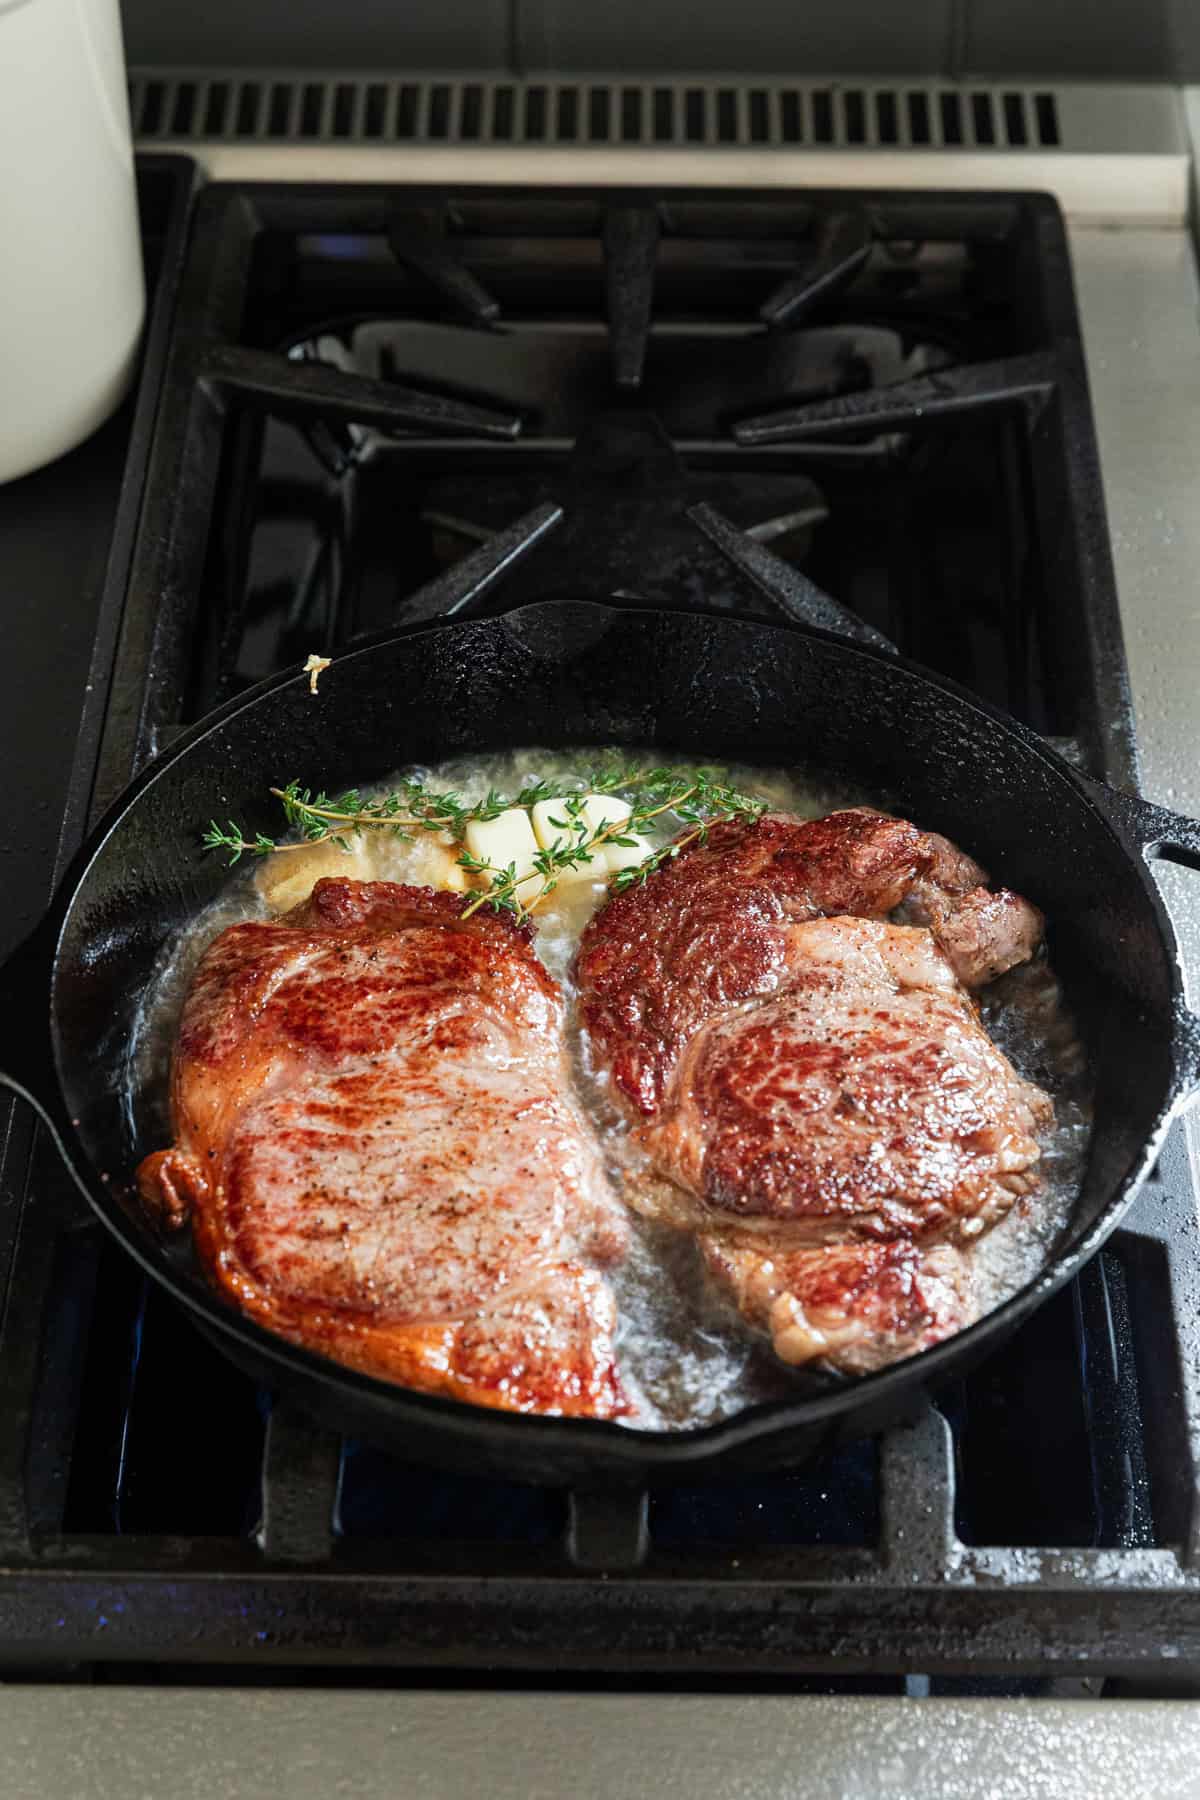 Basting steaks with garlic butter and herbs.